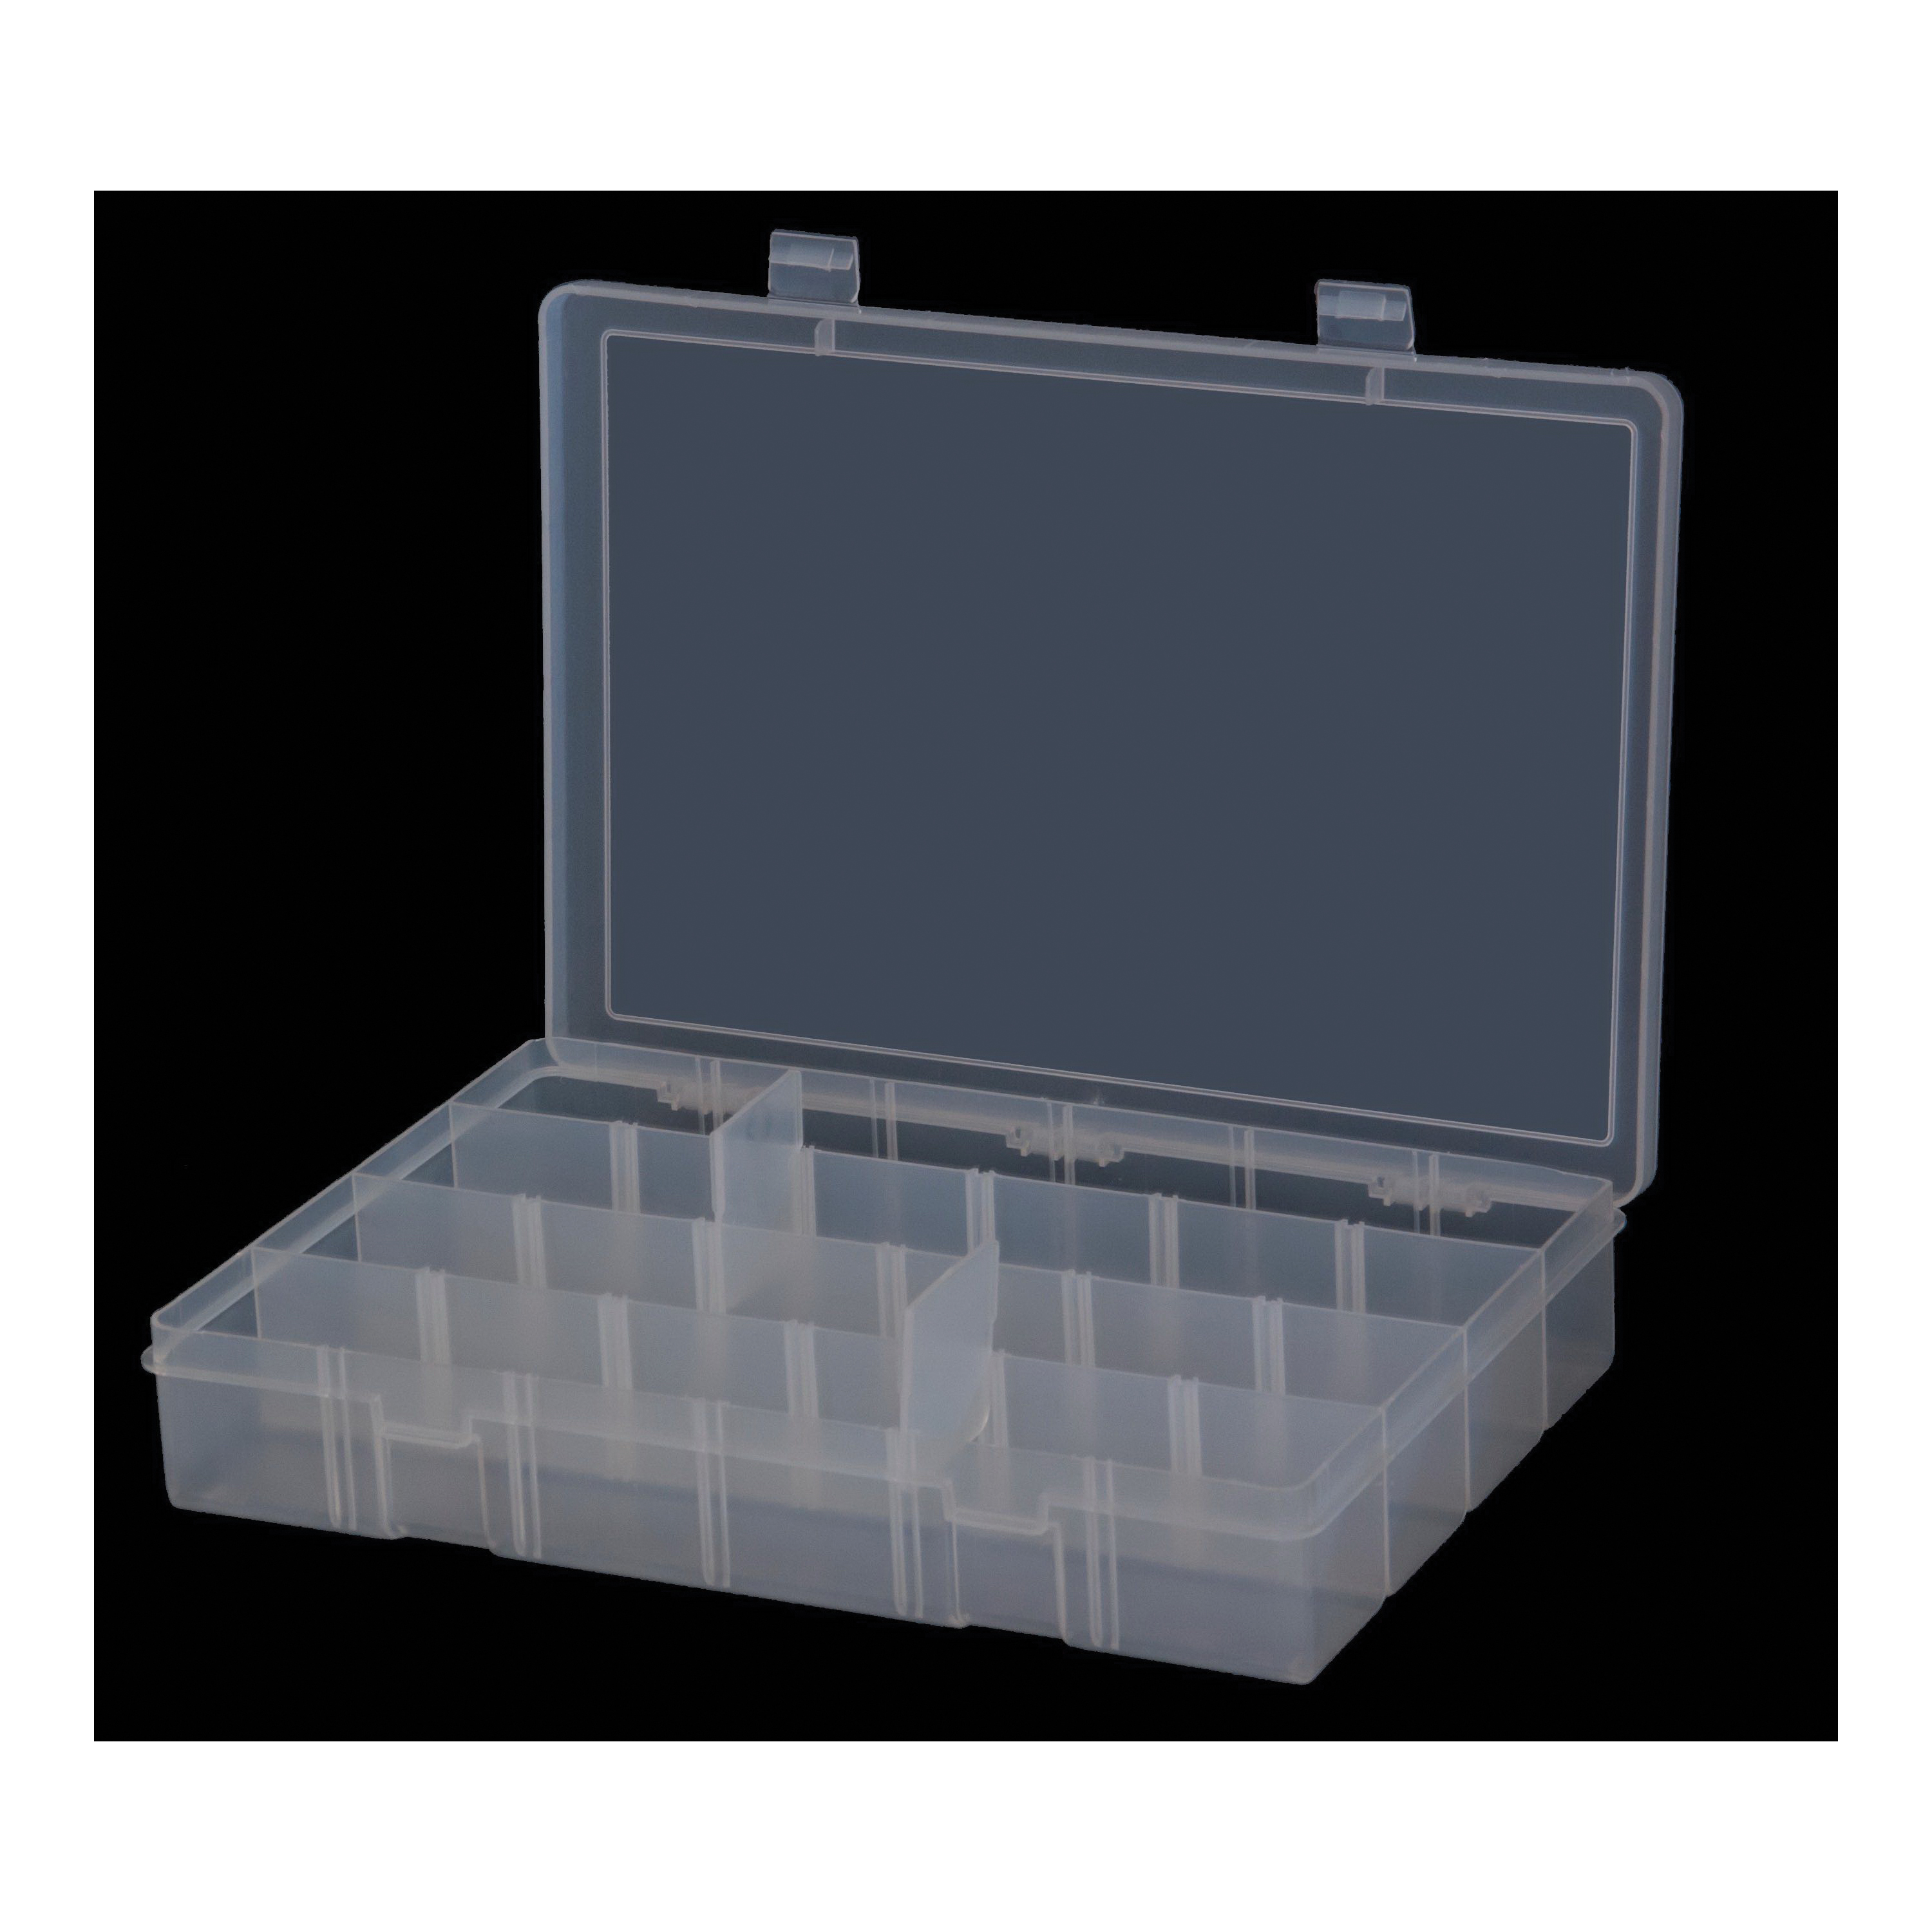 DURHAM MFG® LPADJ-CLEAR Adjustable Large Compartment Box, For Use With 291-95 Rack, Polypropylene, Clear